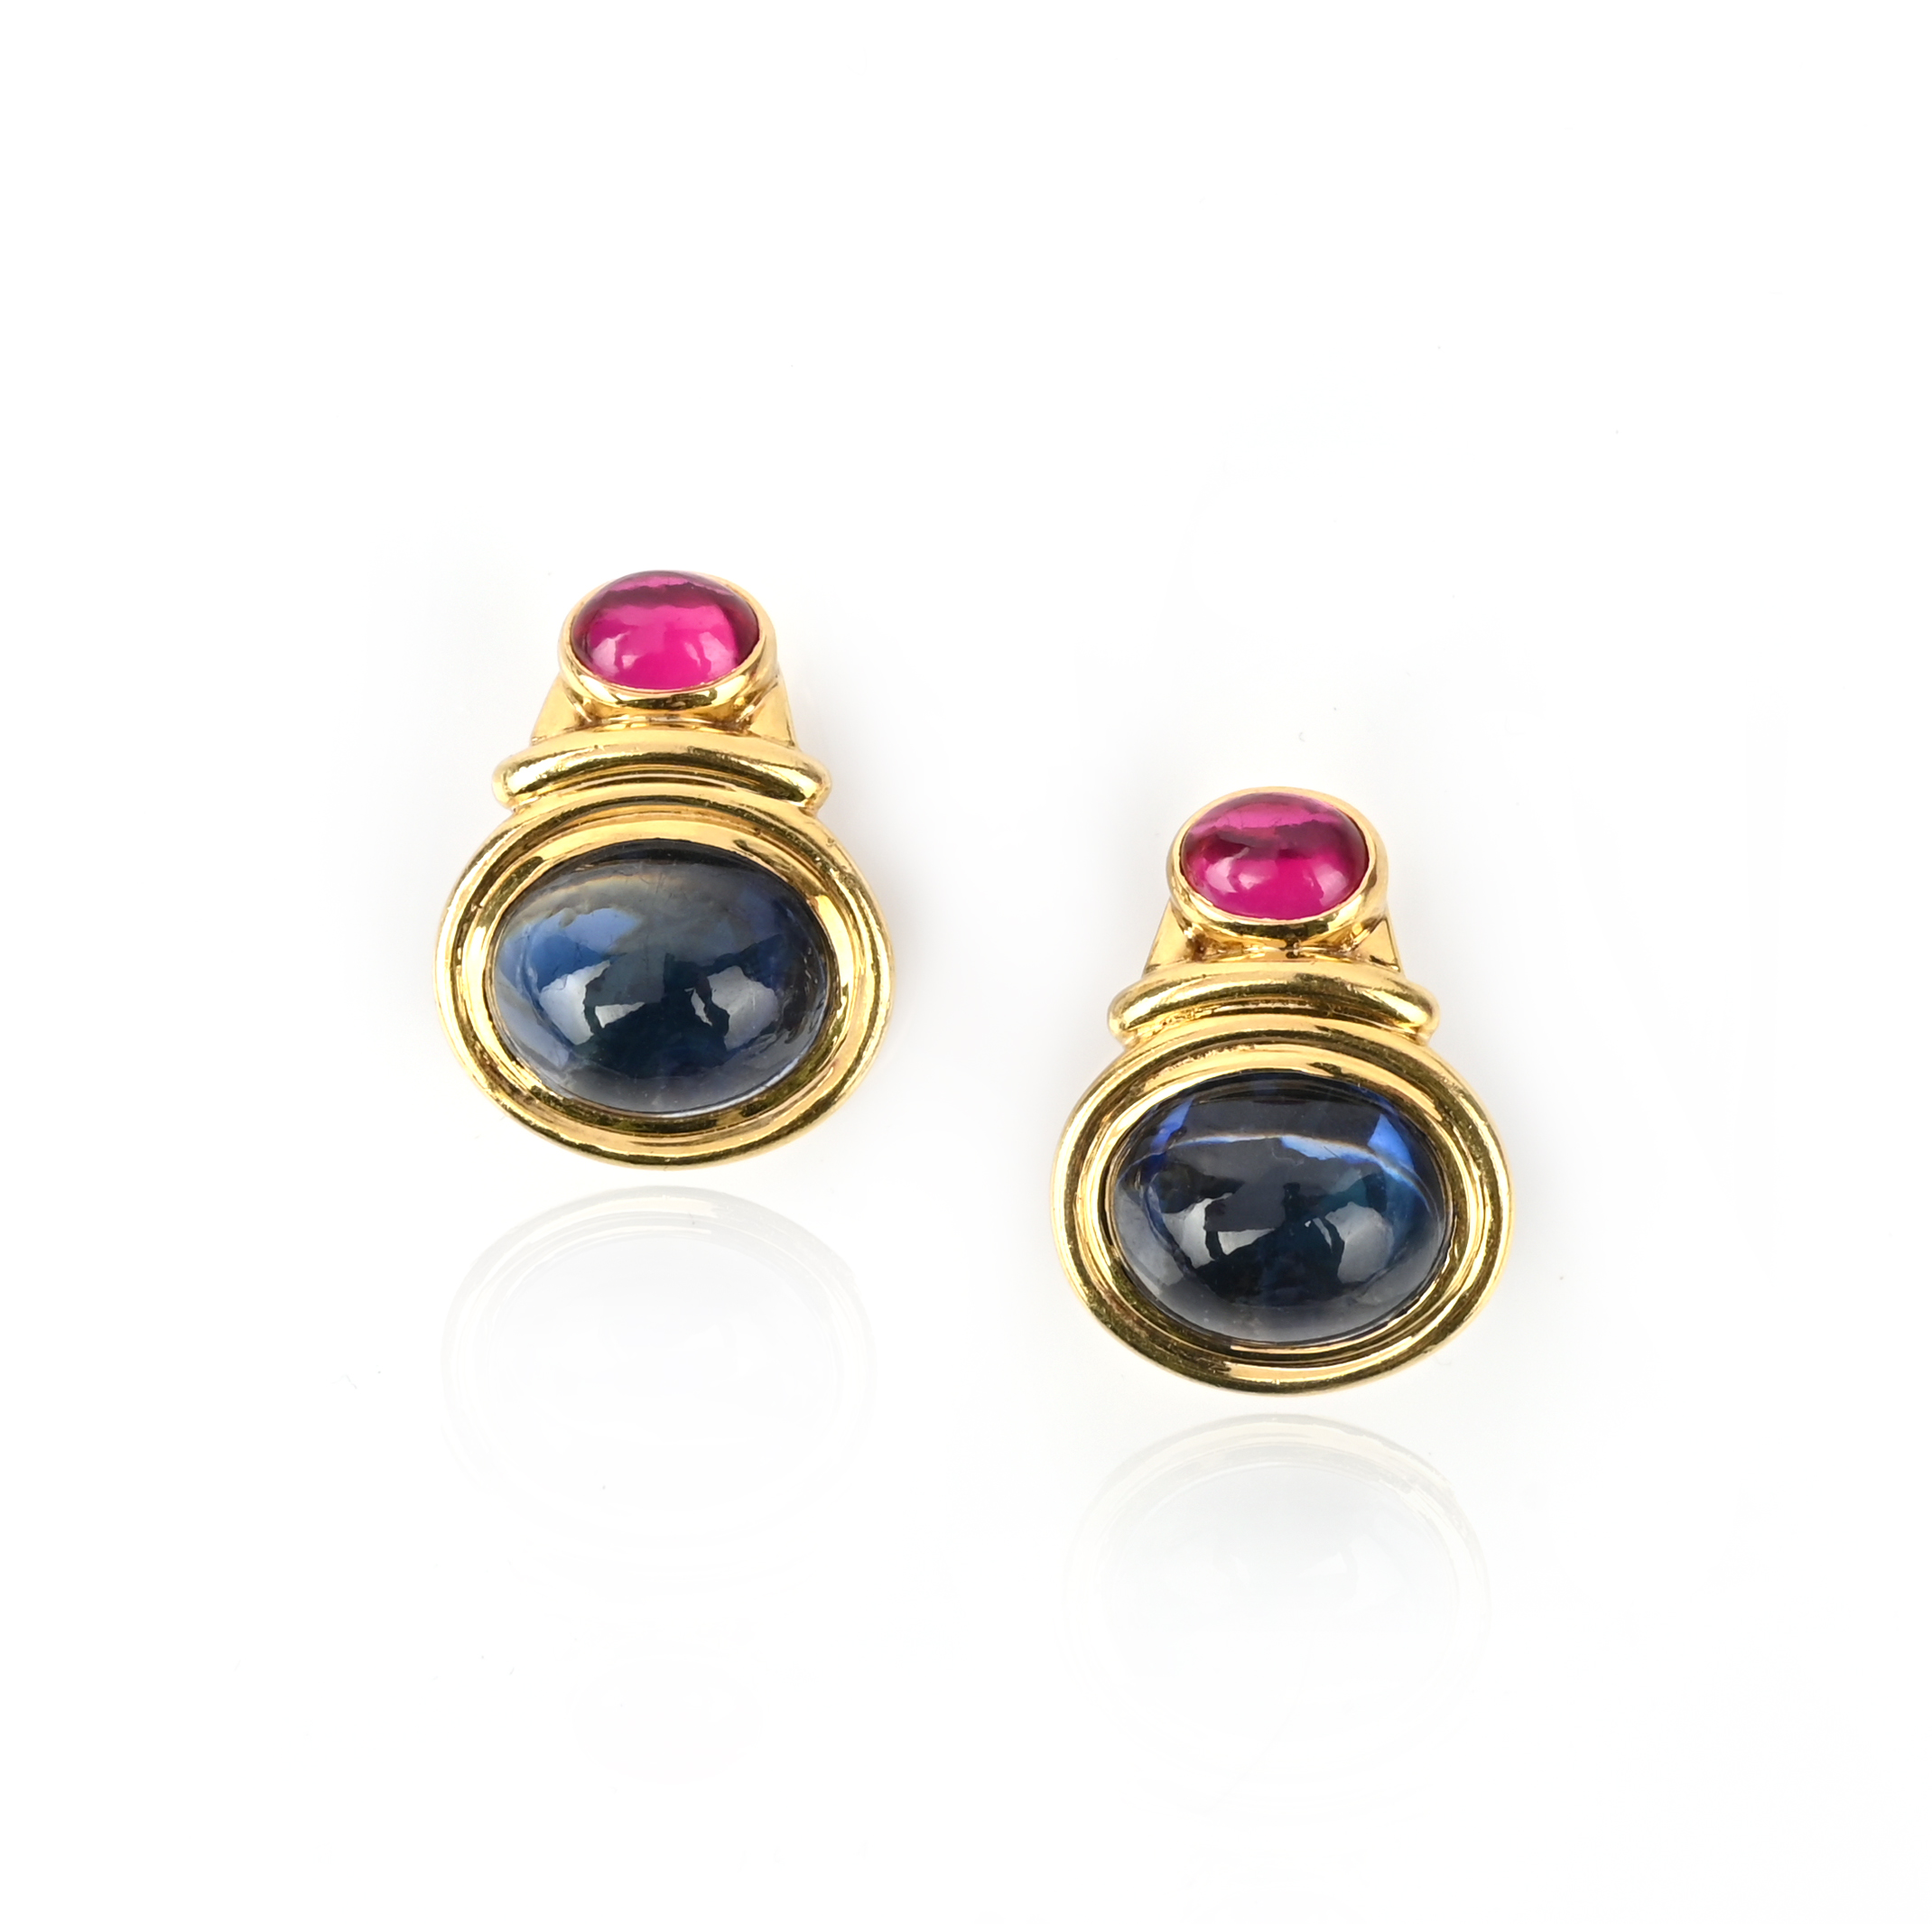 A pair of synthetic gem-set gold earrings, set with a cabochon blue and red stone in polished yellow